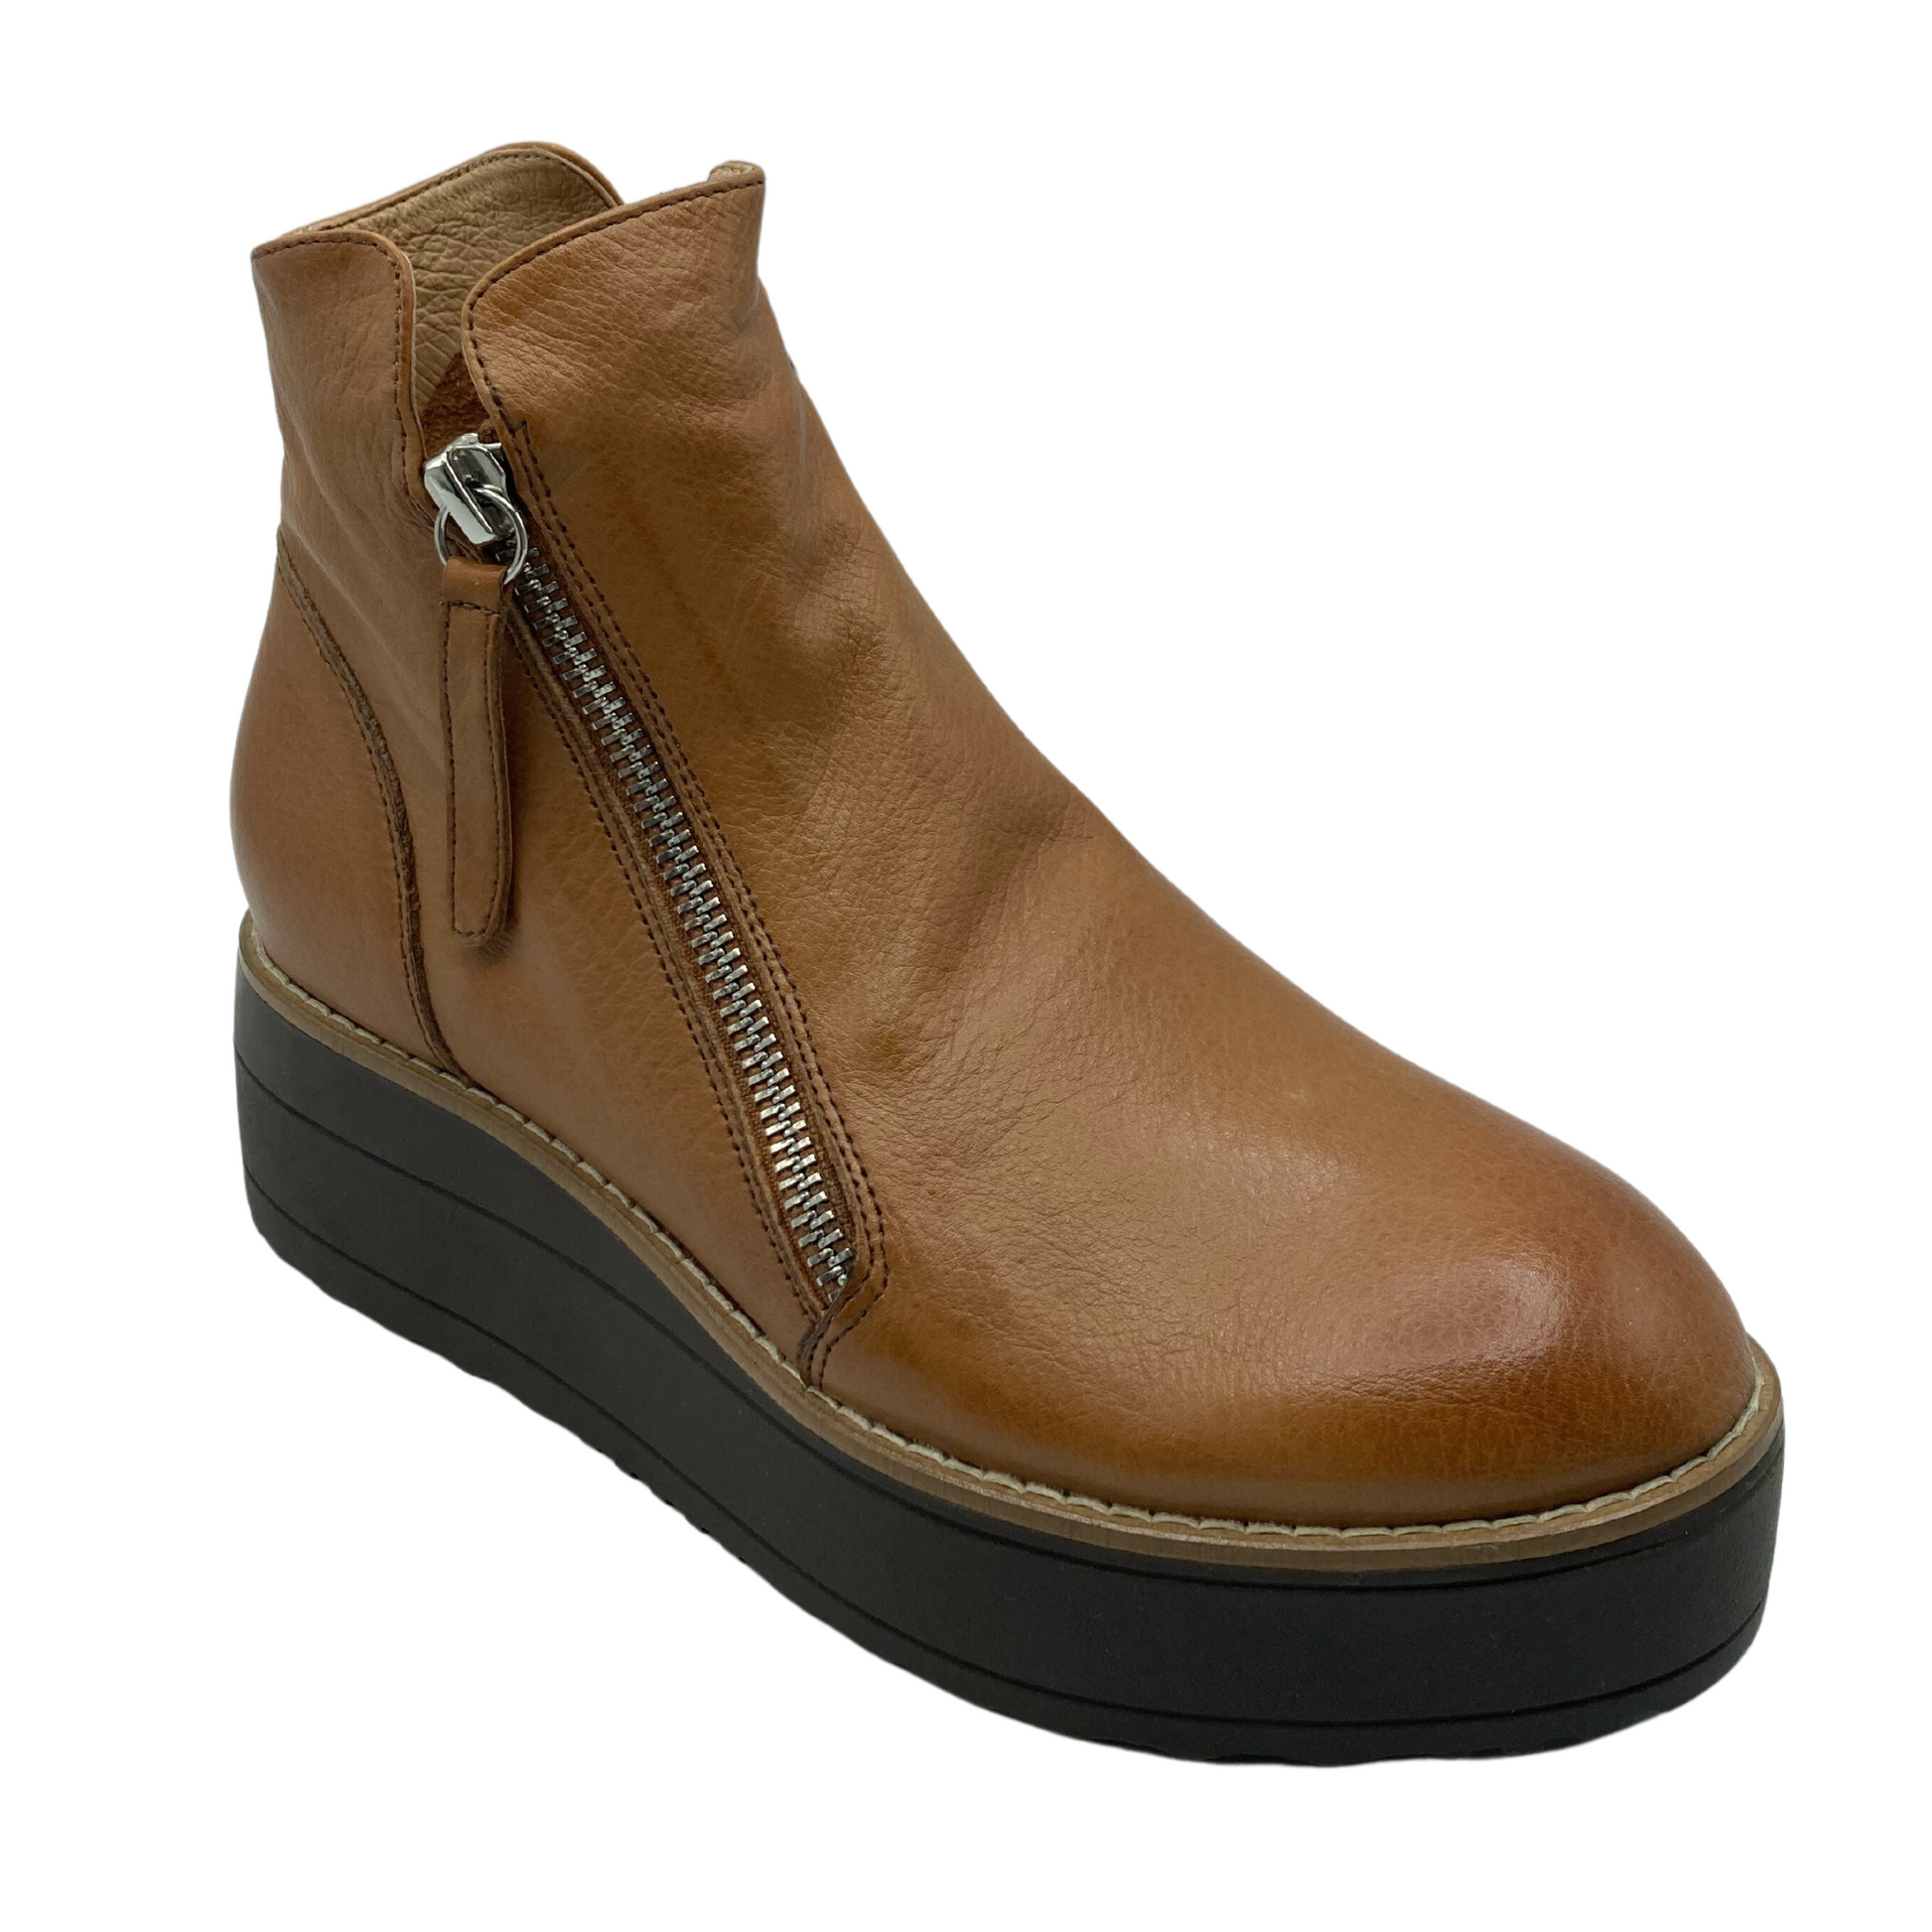 45 angled view of light brown leather boot with rounded toe and dark brown platform sole 